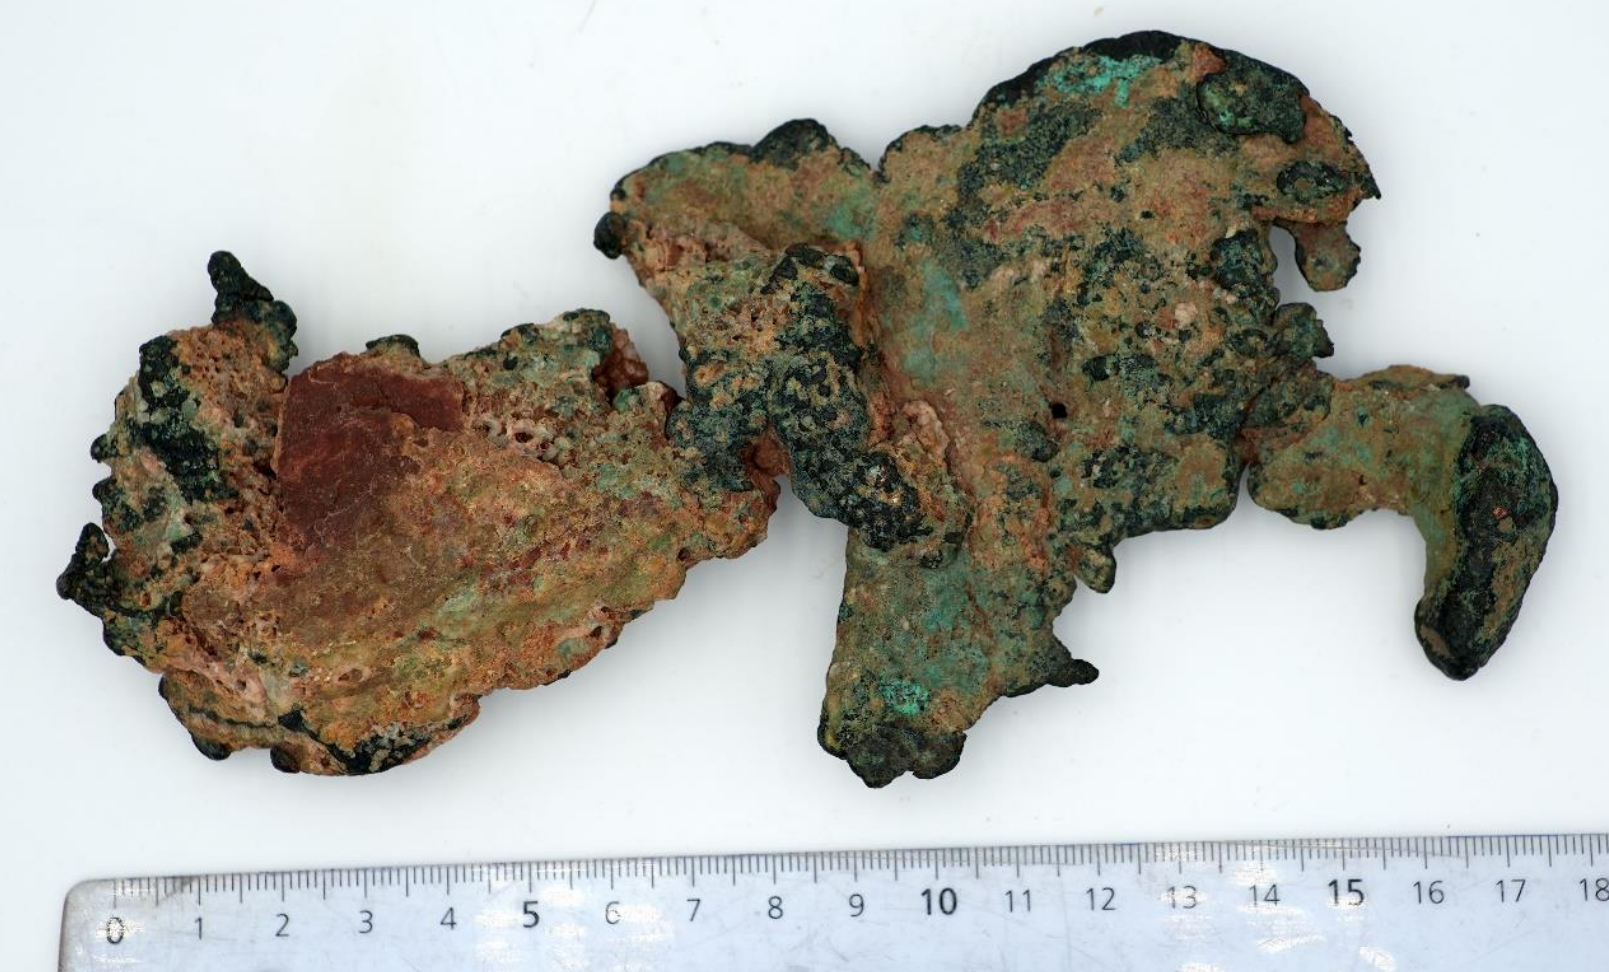 A sample of native copper pulled from Neergard South (source: GreenX)